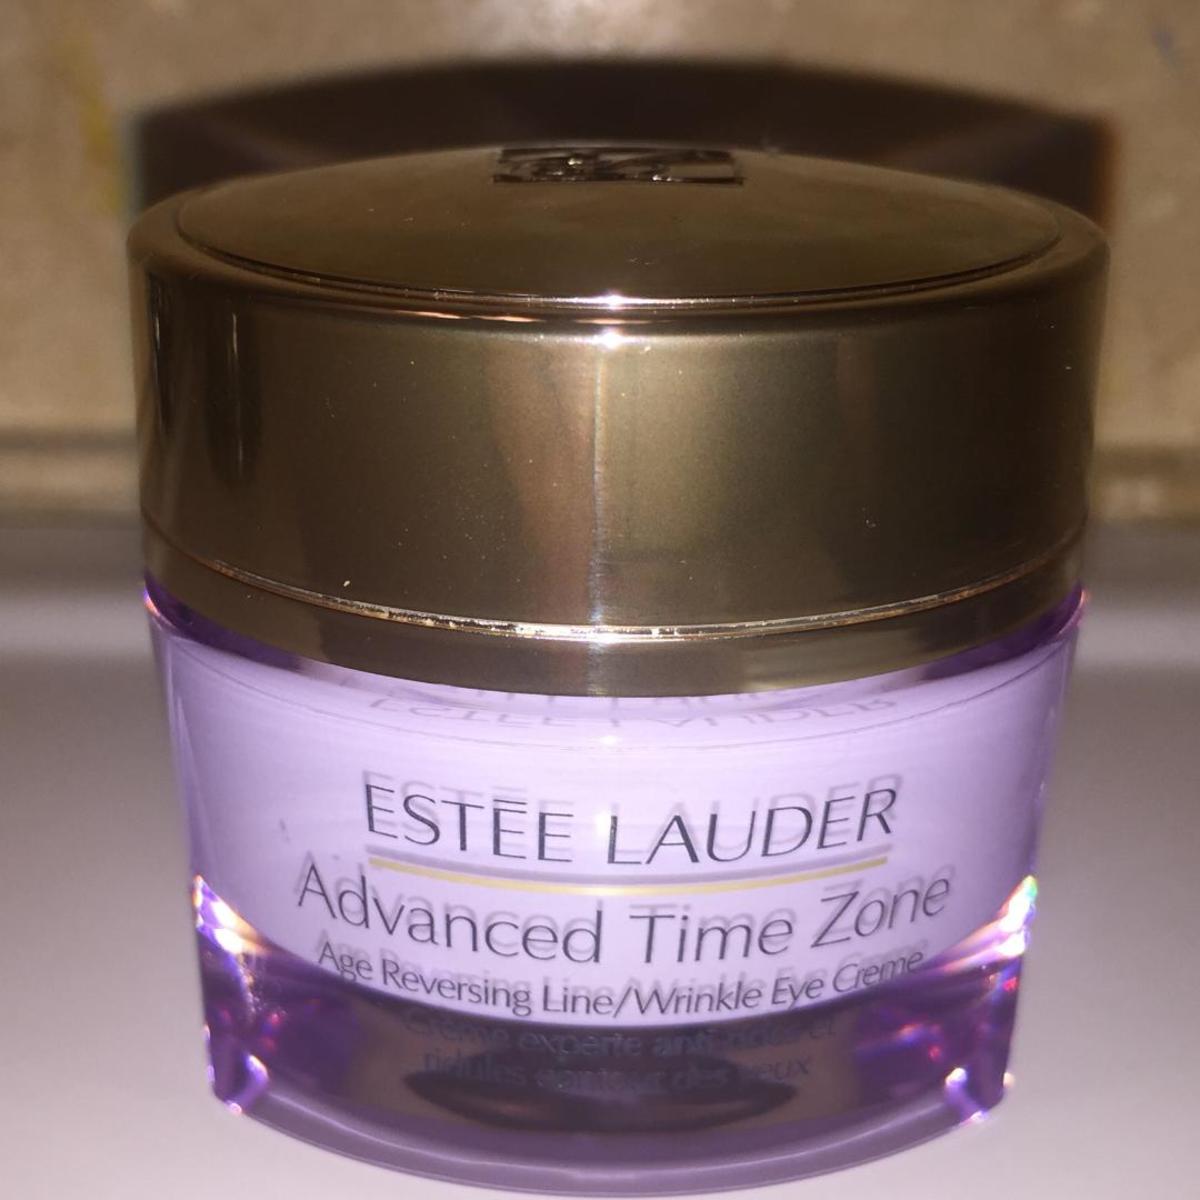 Product Review: Estee Lauder Advanced Time Zone Eye Cream